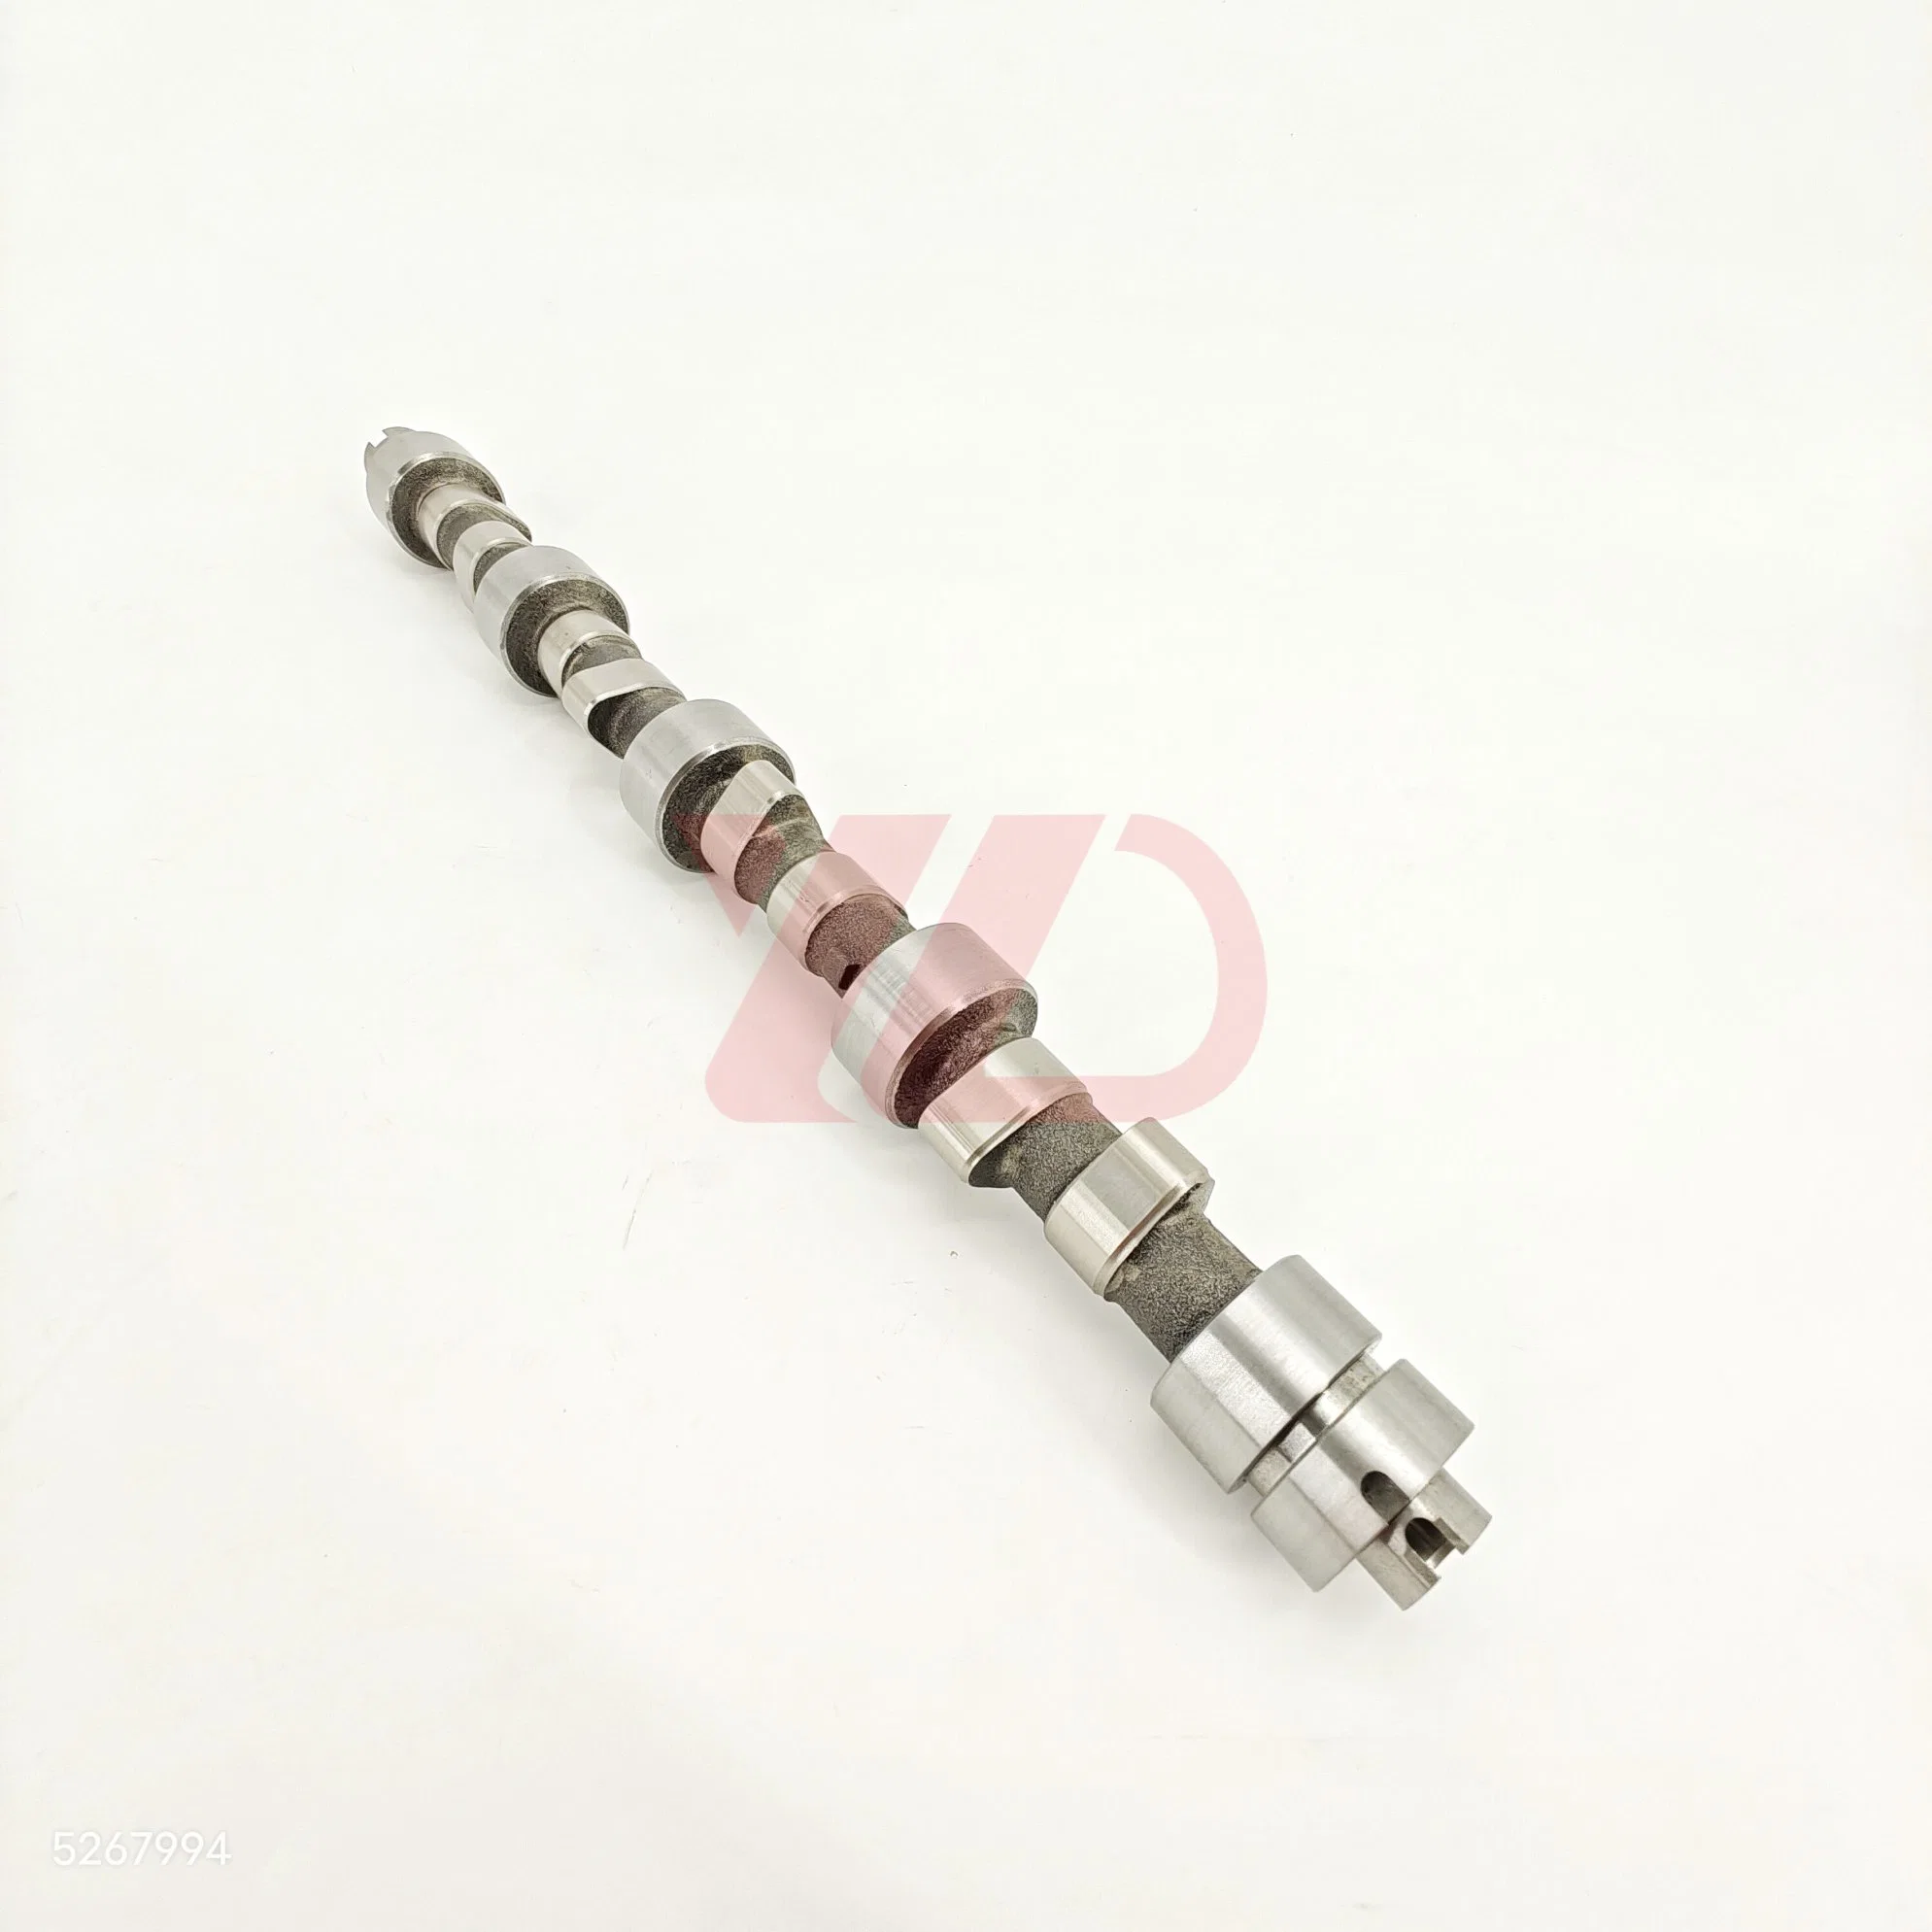 for Cummins Diesel Engine Parts Competitive Price Foton Isf 2.8 Camshaft 5267994